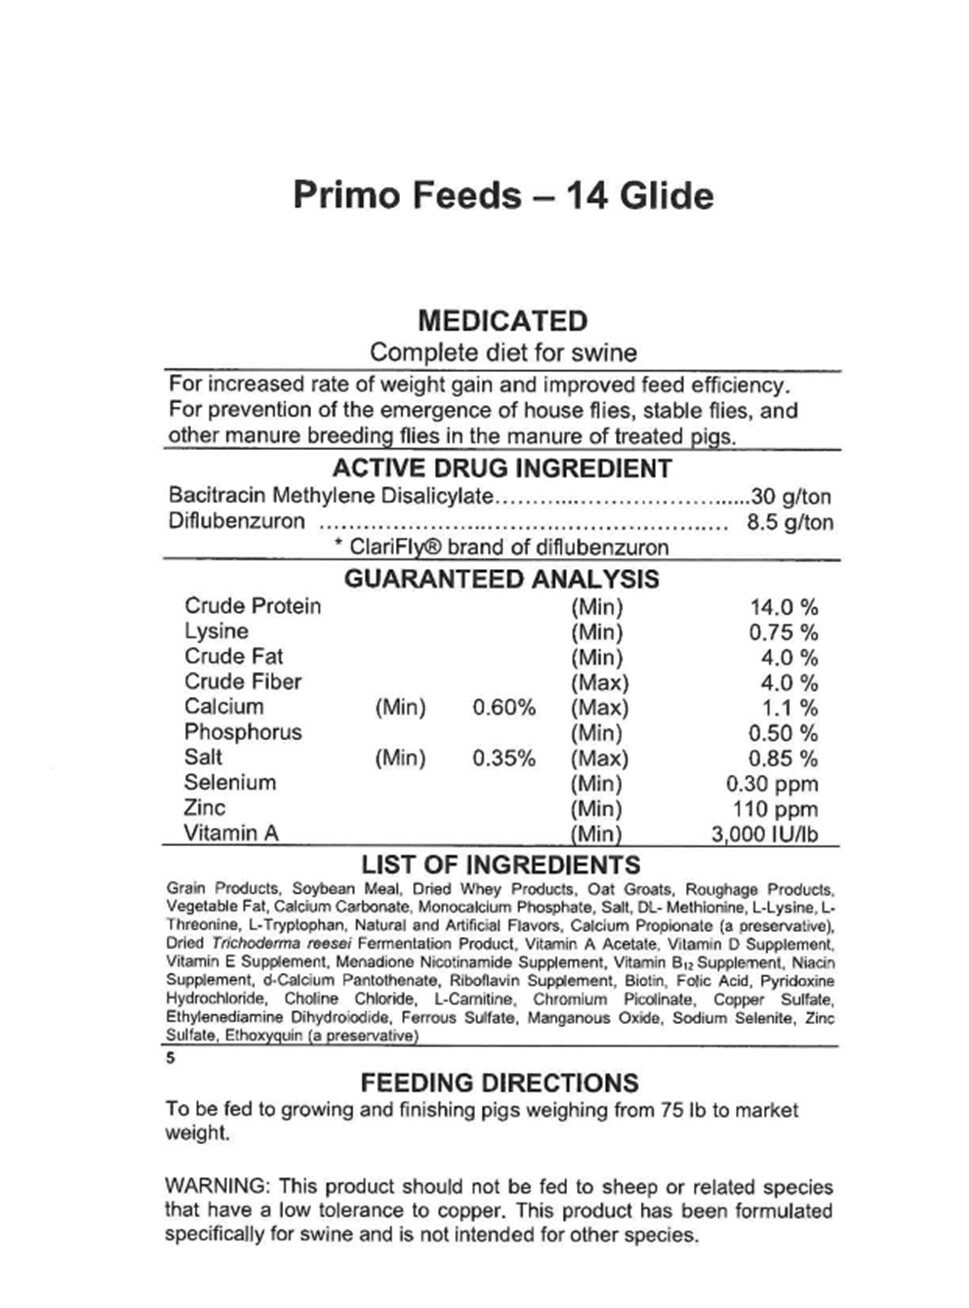 may-2024-primo-feed-14-glide-tech-information.jpg